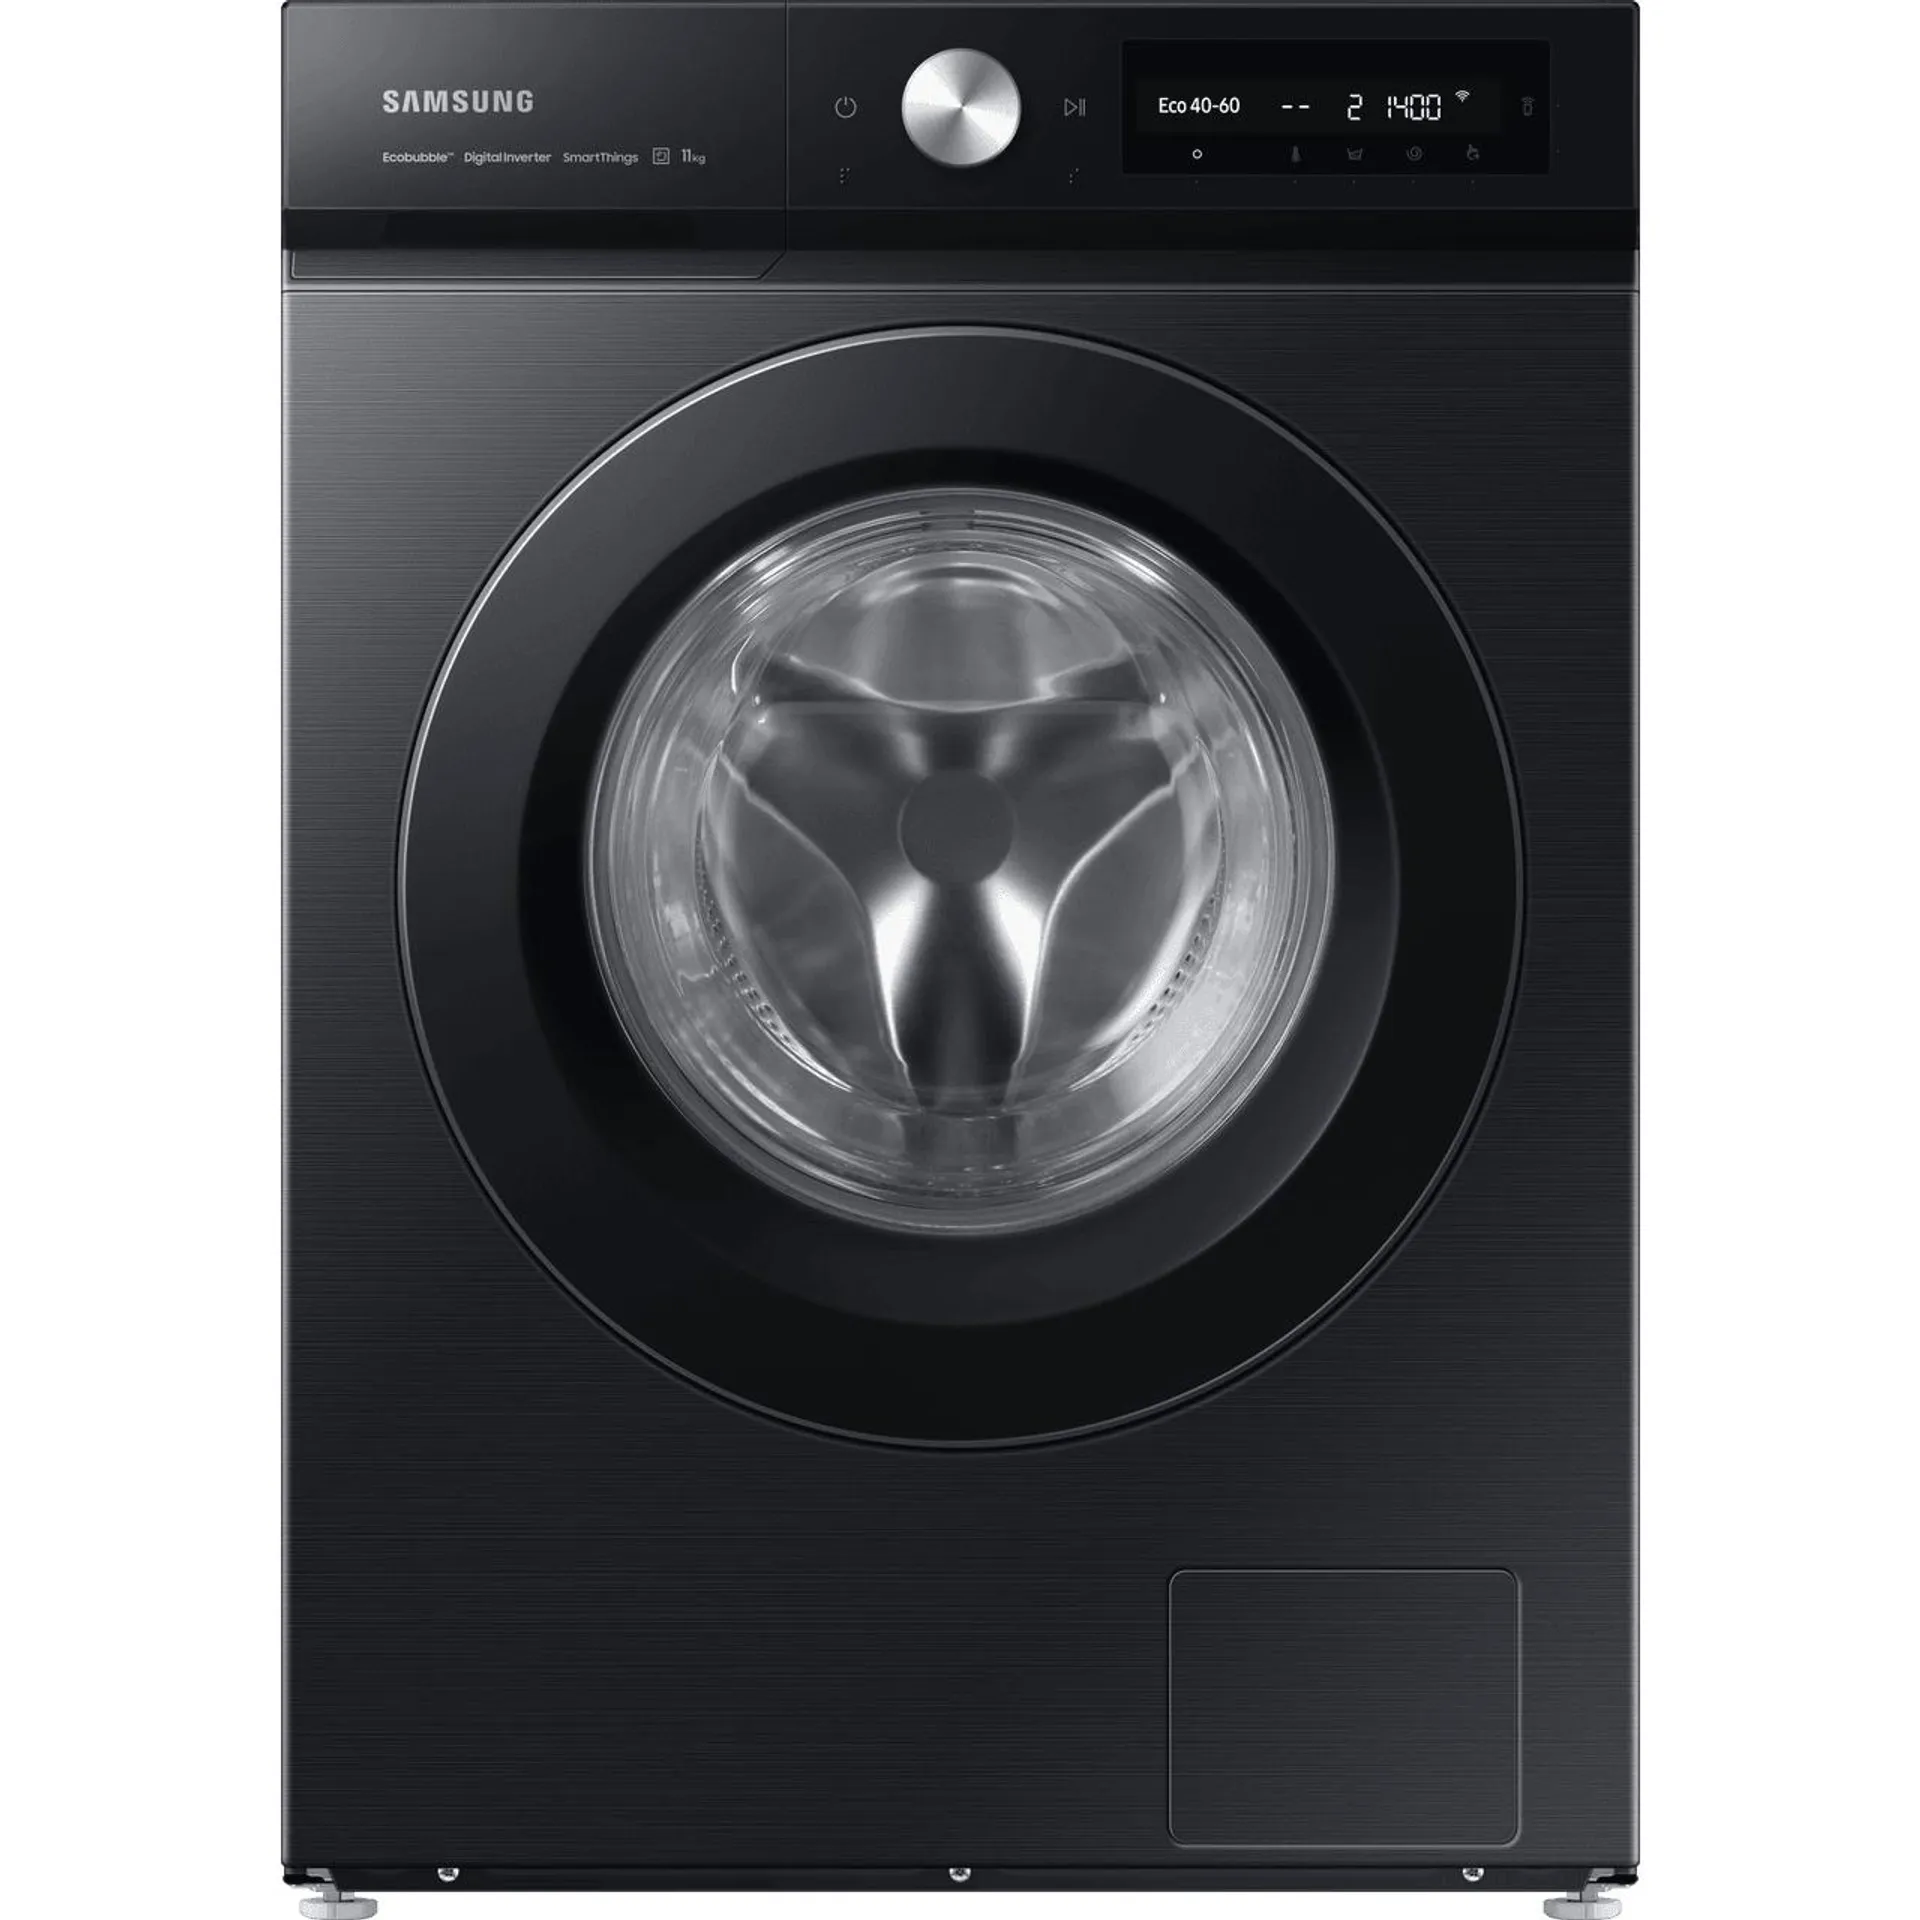 Samsung Series 5+ SpaceMax WW11BB504DAB 11kg Washing Machine with 1400 rpm - Black - A Rated